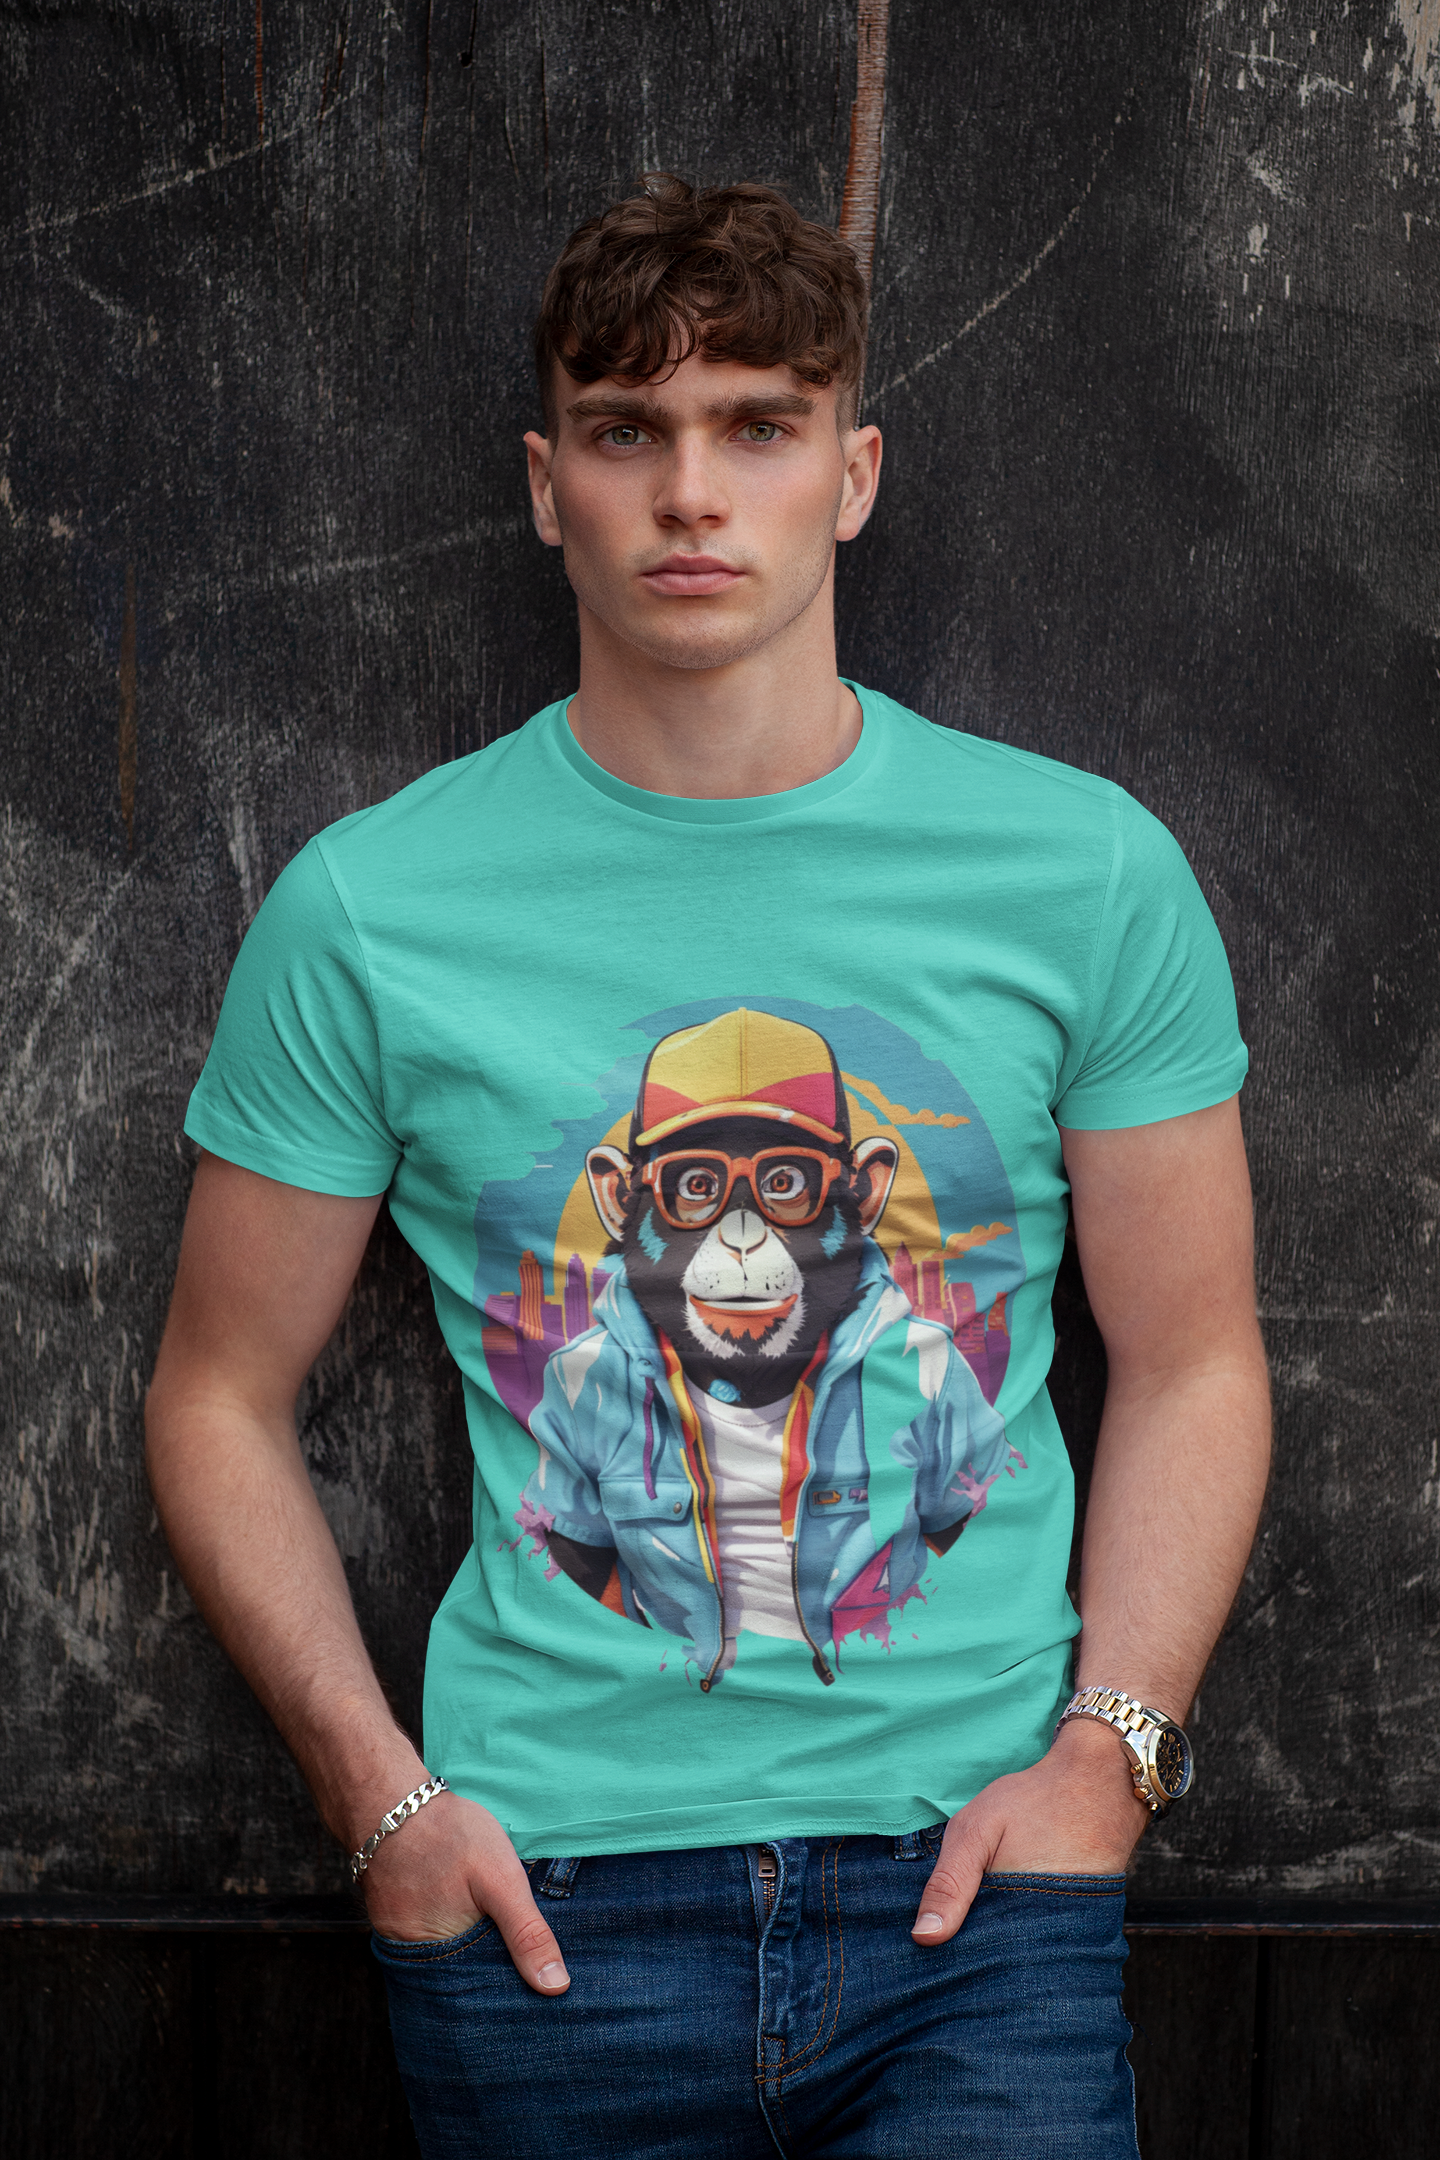 "Limited Edition Graffiti Gorilla: Urban Hip-Hop Graphic Tee for the Trendy Streetwear Connoisseur" T-Shirt Bigger Than Life Turquoise S 